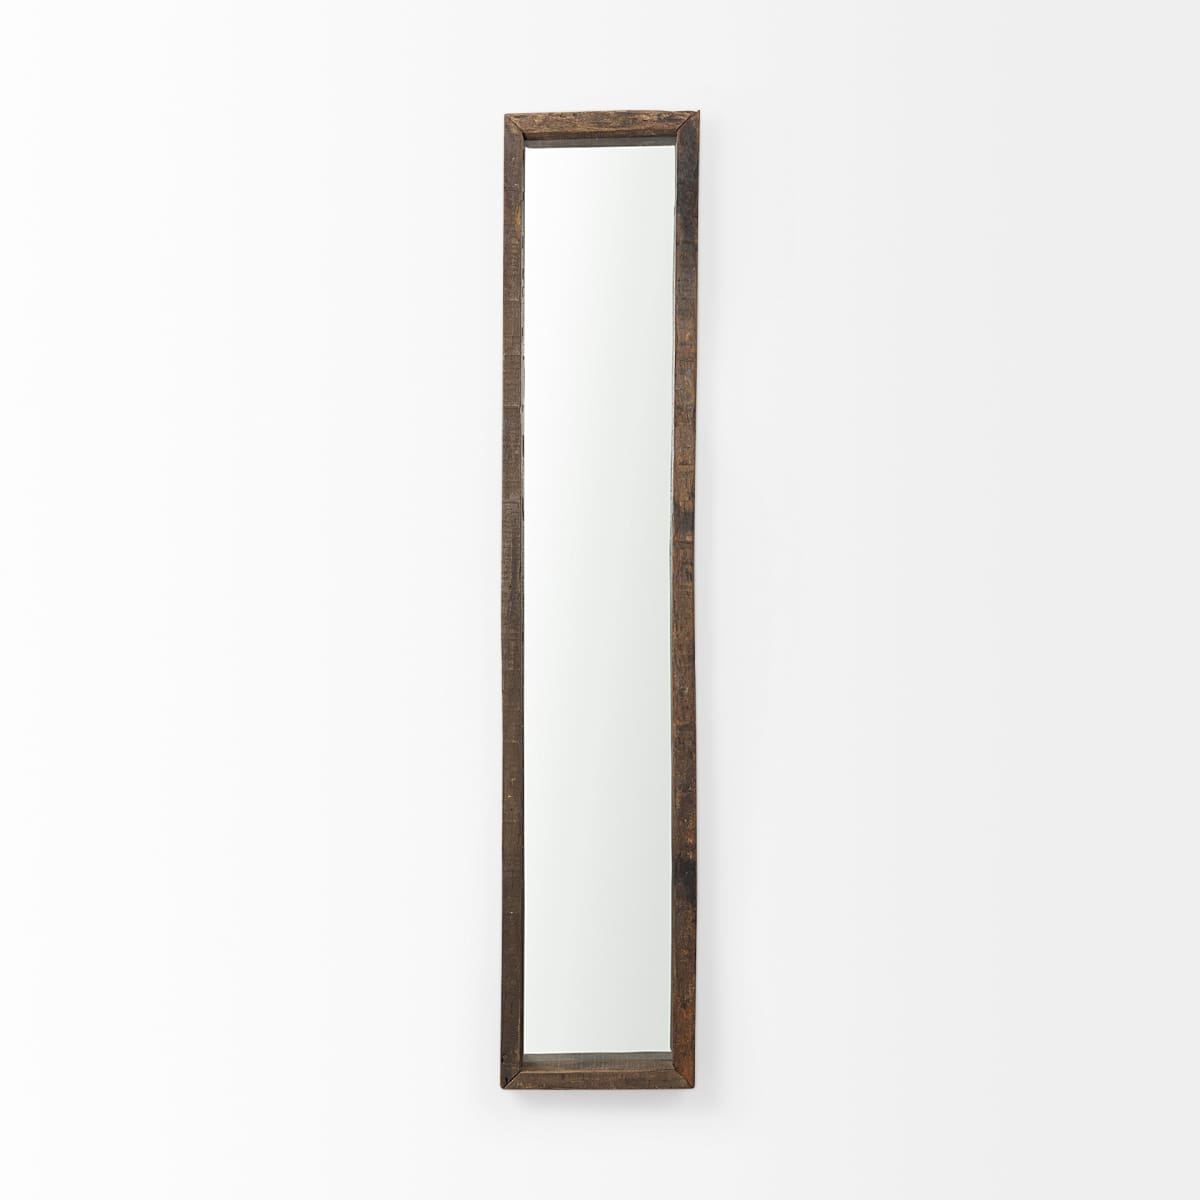 Gervaise Wall Mirror Brown Wood | 12L x 2W x 59H - wall-mirrors-grouped